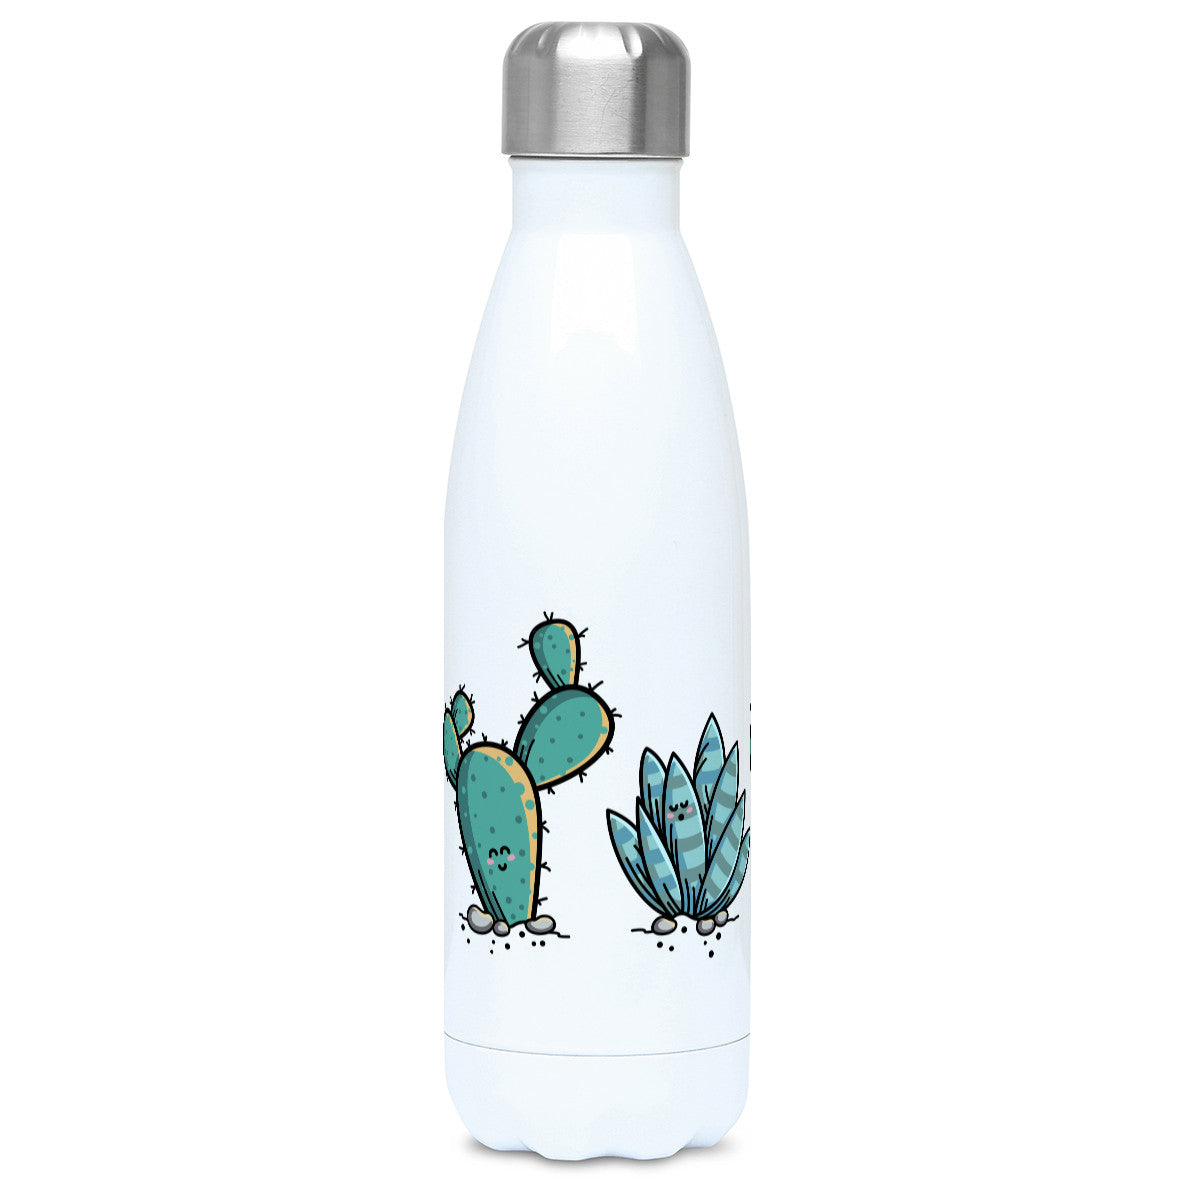 Four kawaii cute cactus plants design on a white metal insulated drinks bottle, lid on